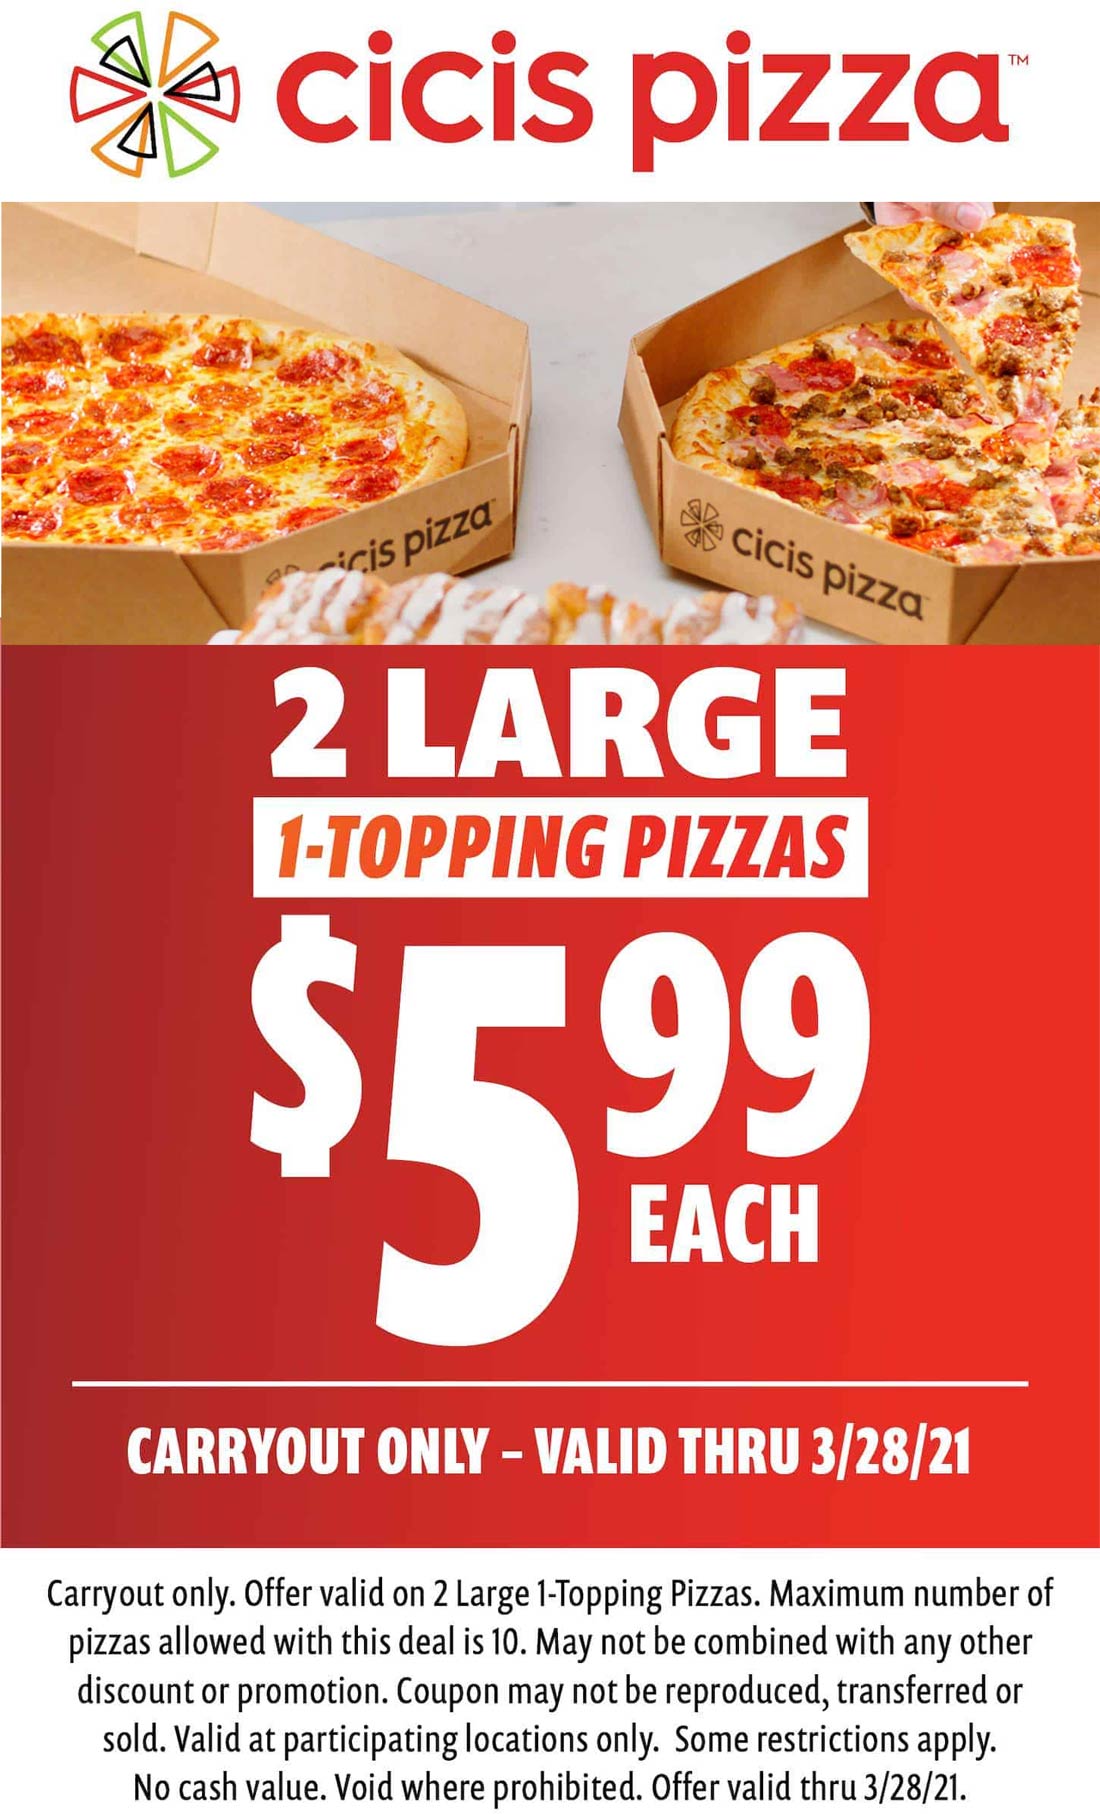 Cicis Pizza restaurants Coupon  Large 1-topping pizzas = $6 each as carryout at Cicis Pizza #cicispizza 